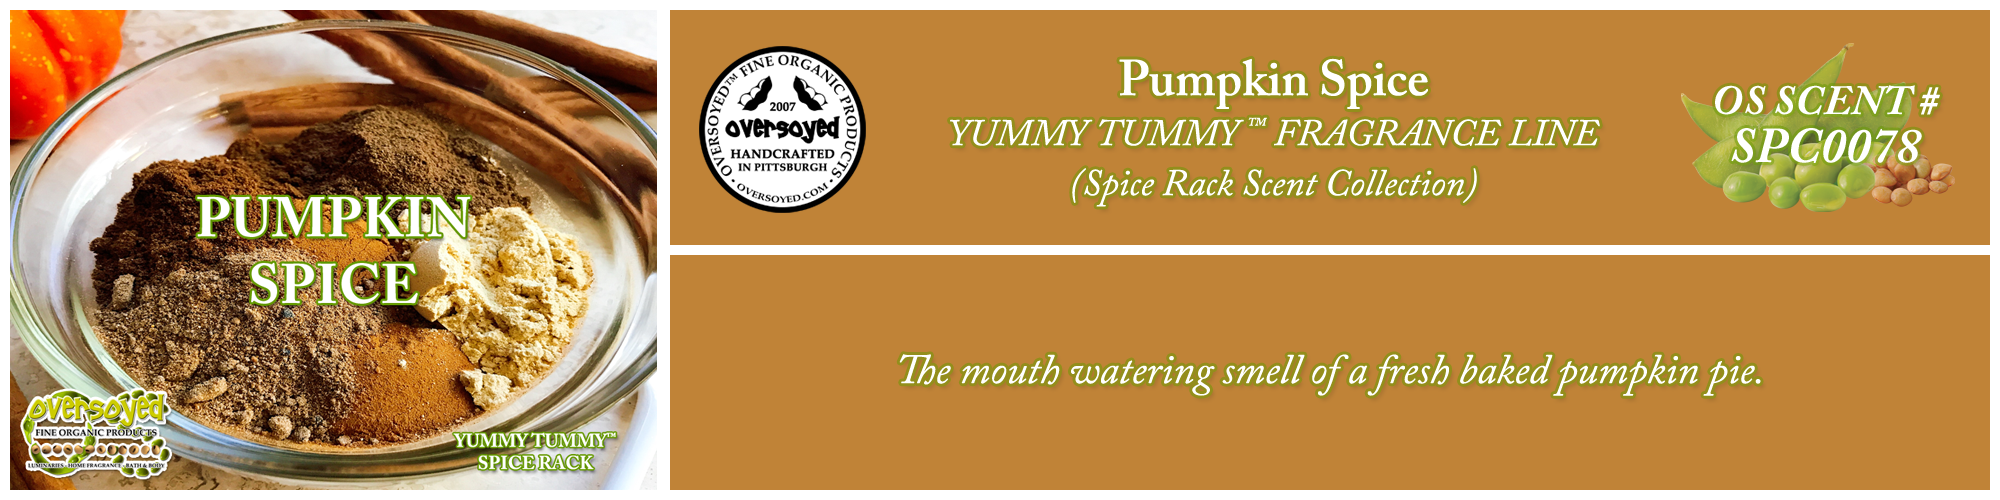 Pumpkin Spice Handcrafted Products Collection